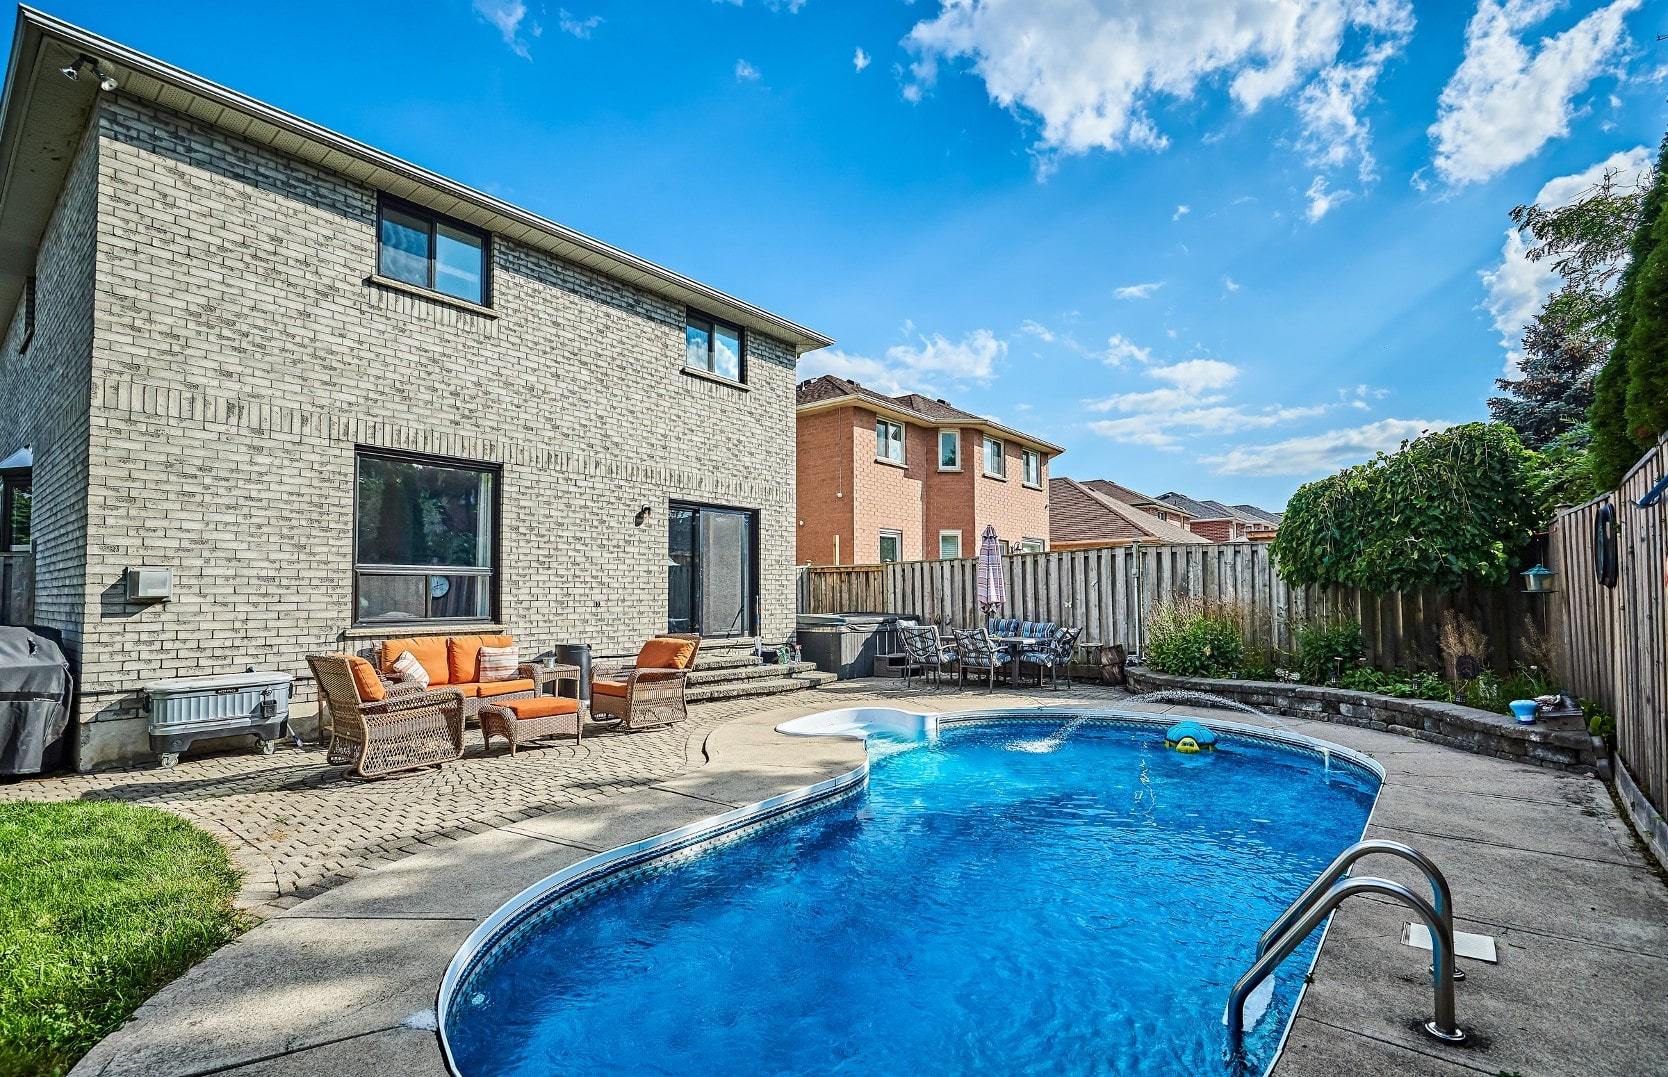 Backyard pool on a sunny day at a home for sale in Courtice, Ontario